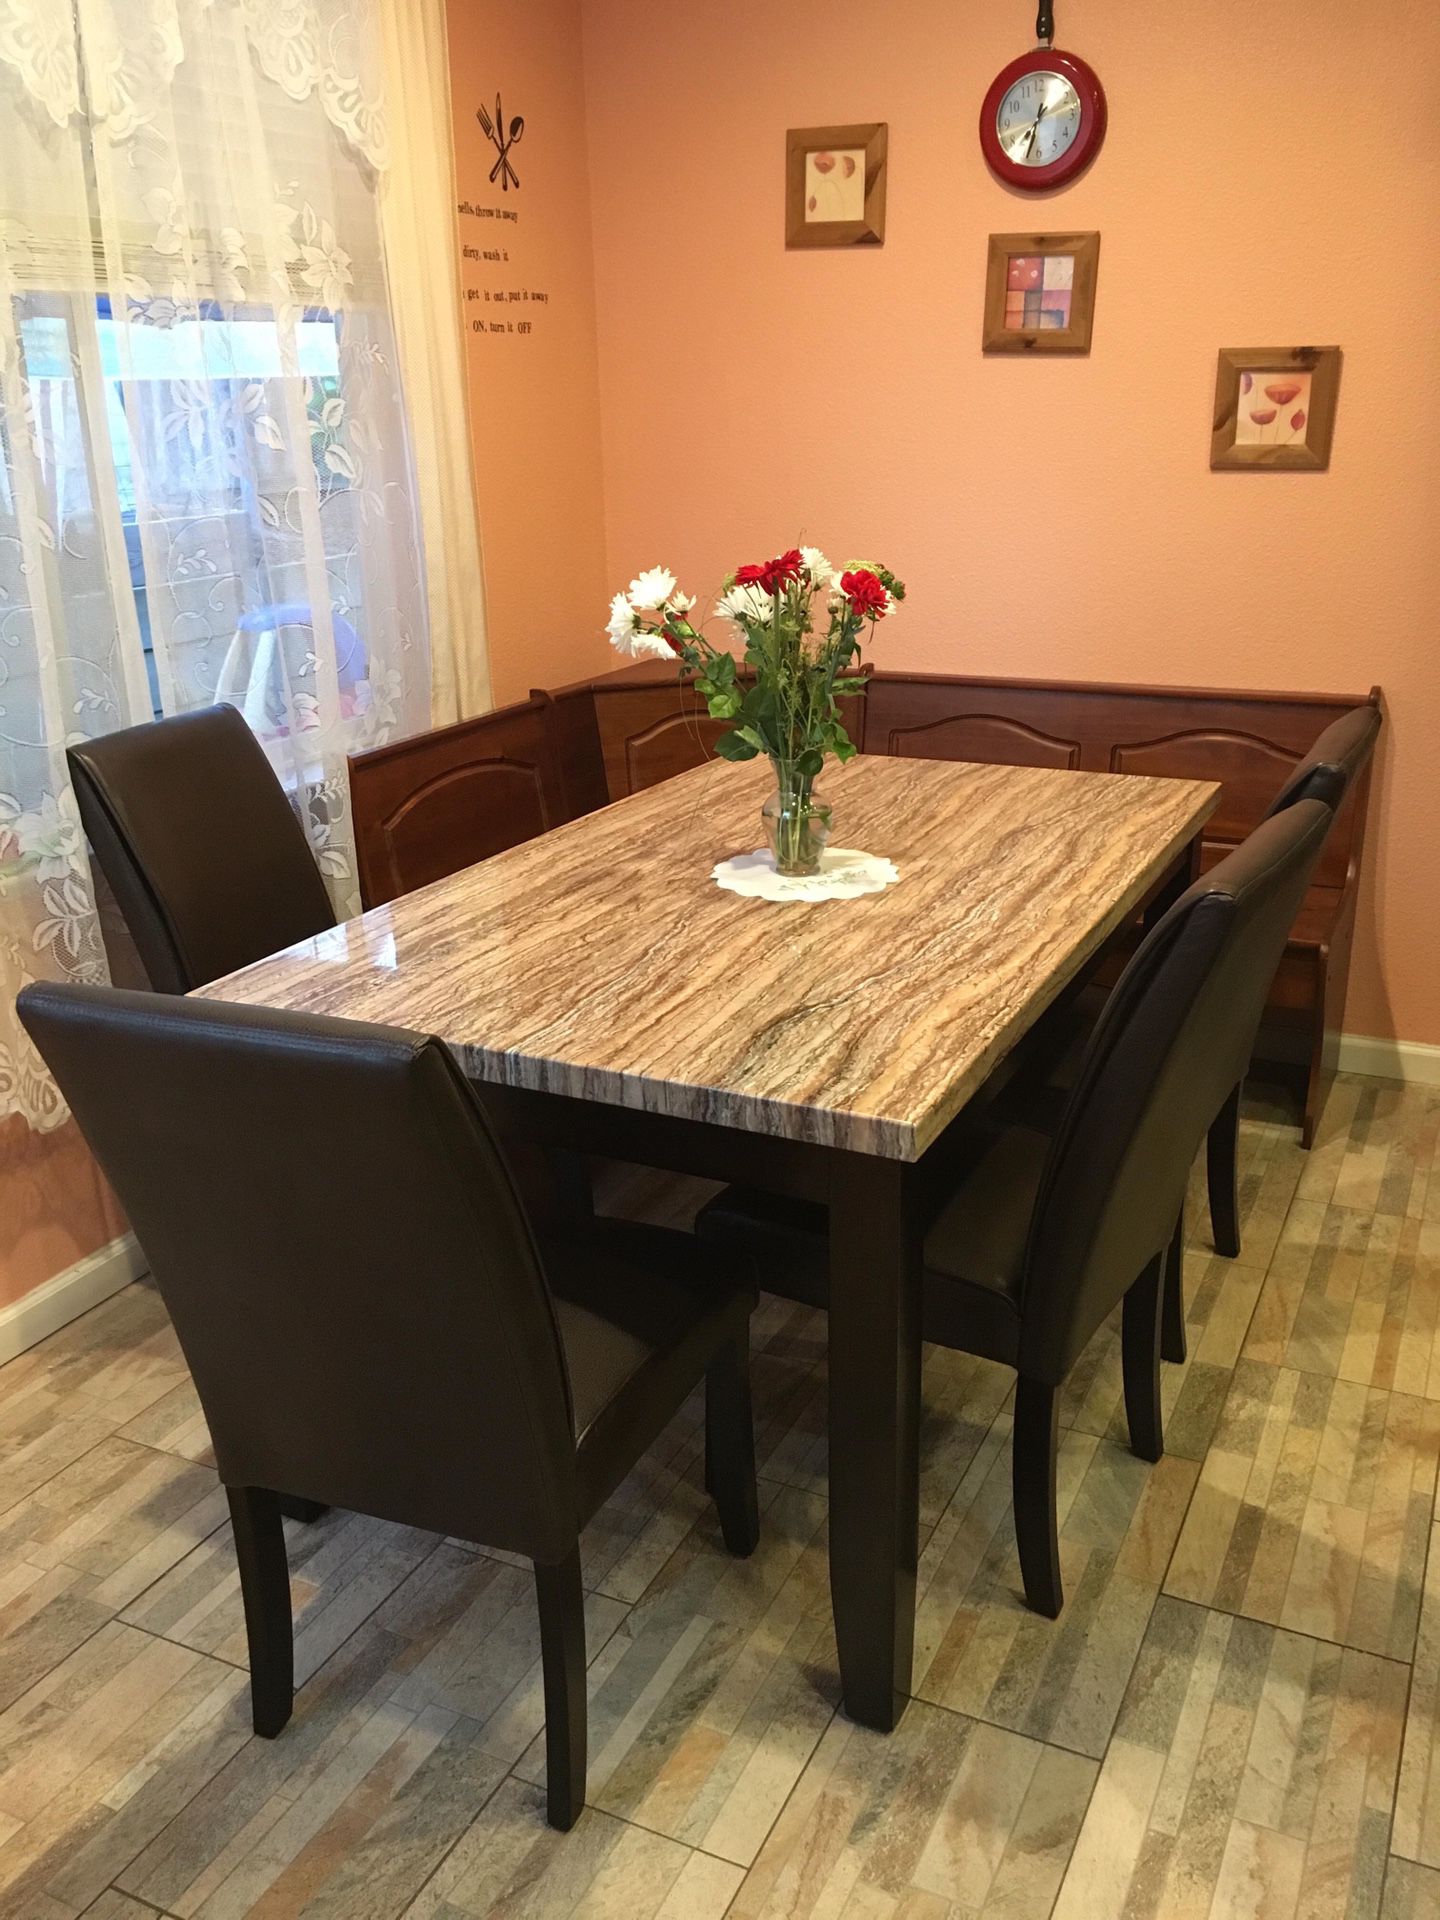 NEW in BOX Dining Table Set with 4 Chairs